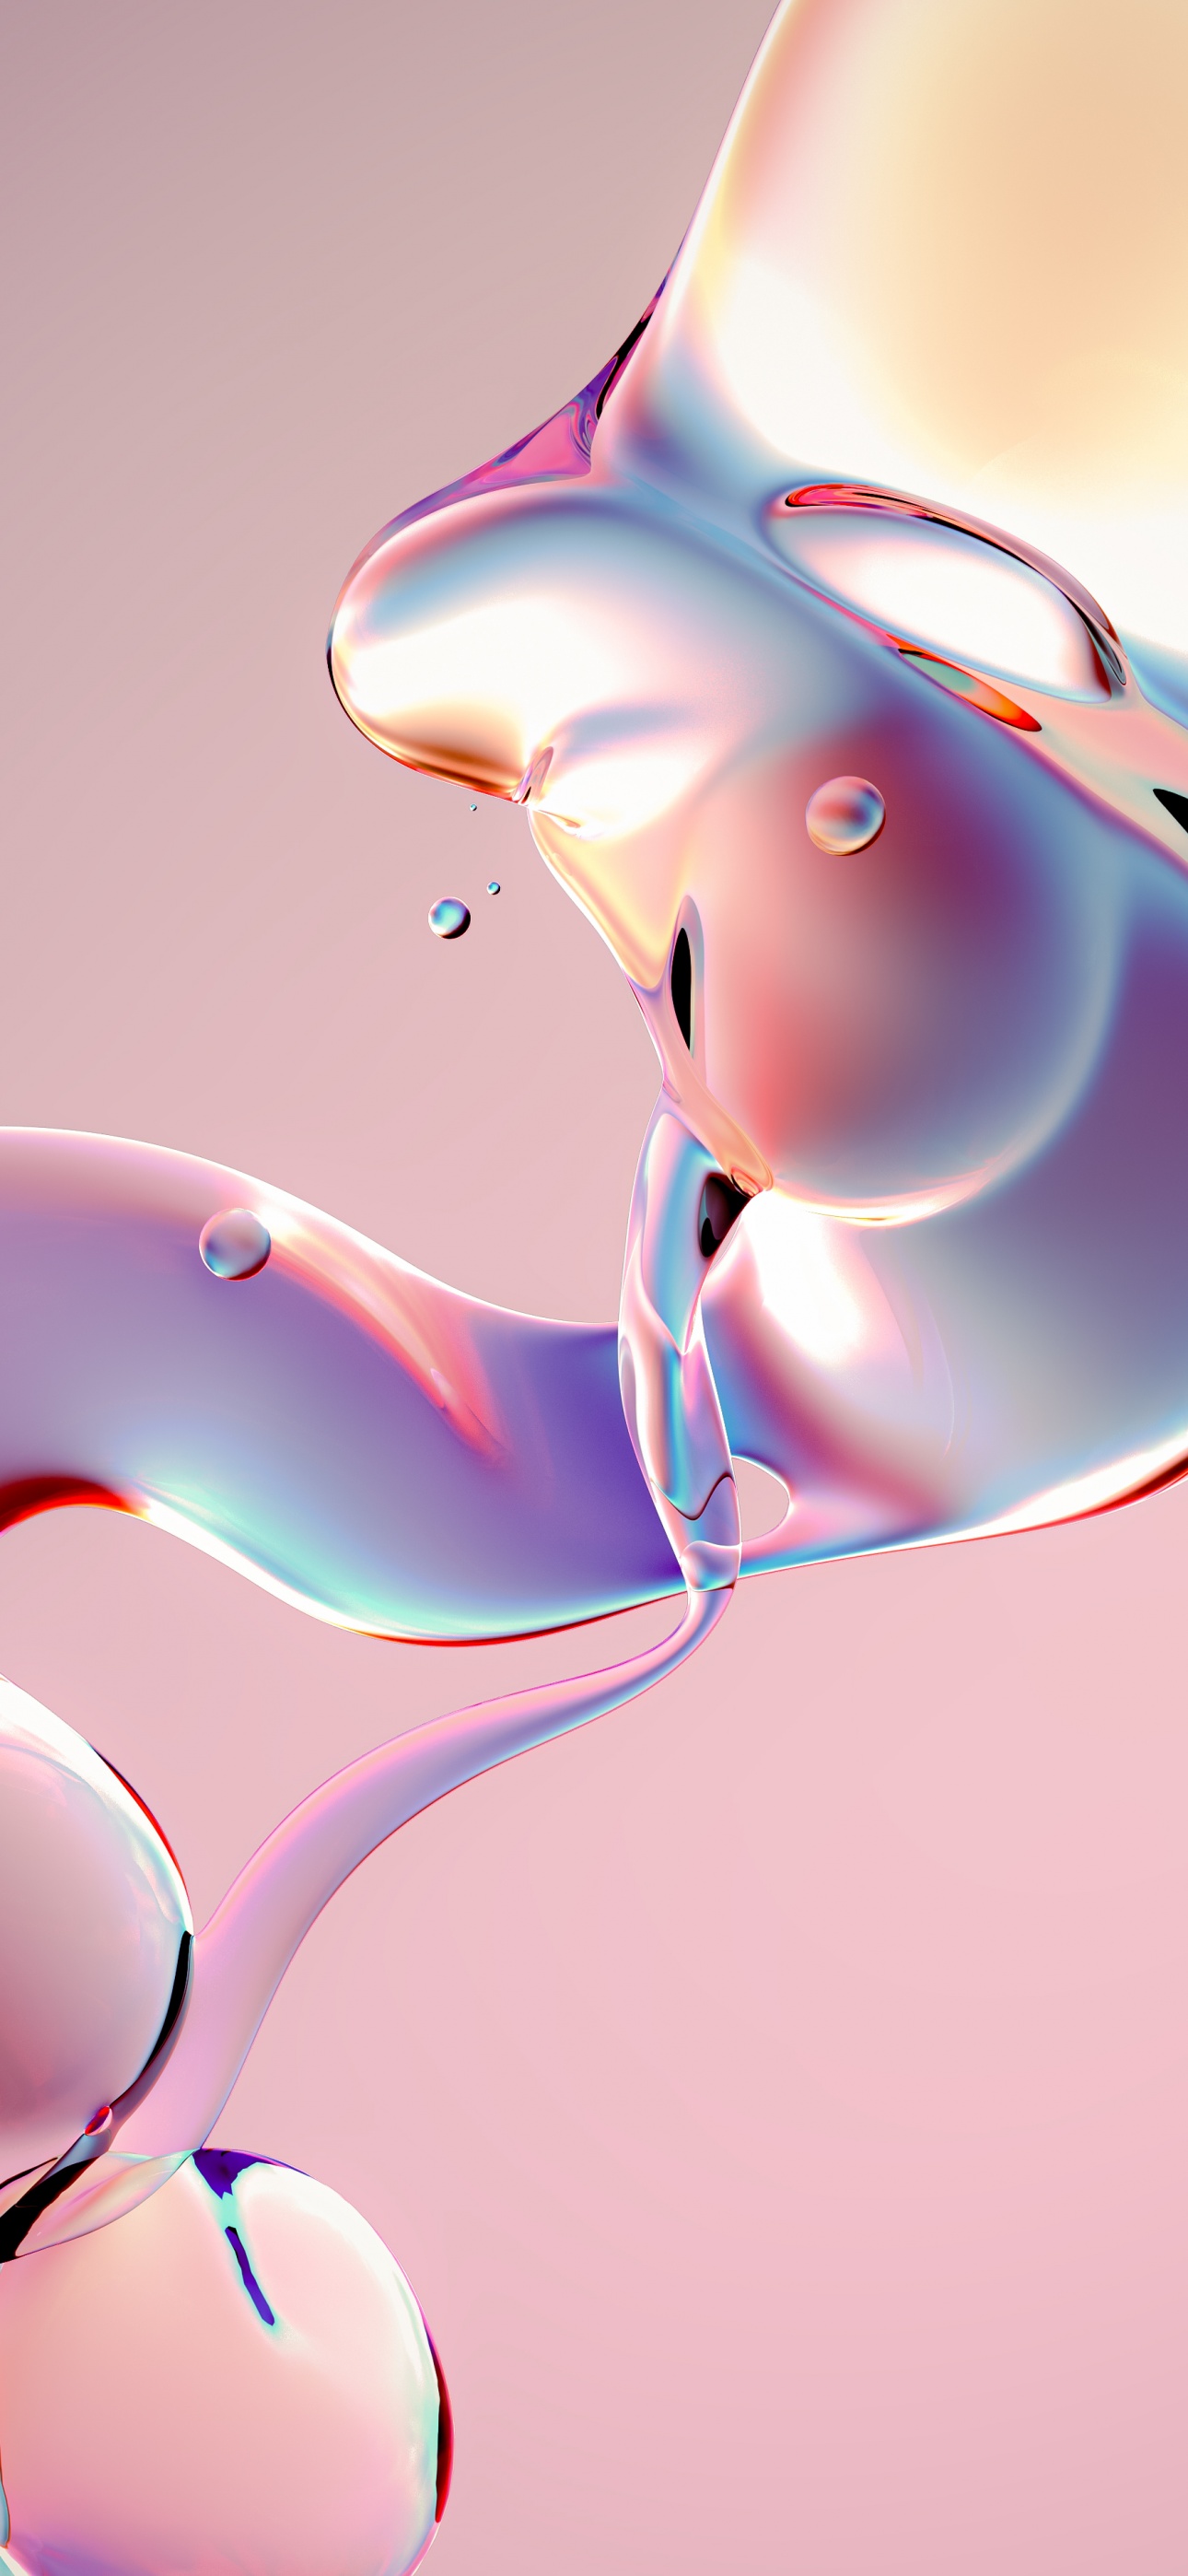 Fluidic Wallpaper 4K, Glossy, Abstract, #7663